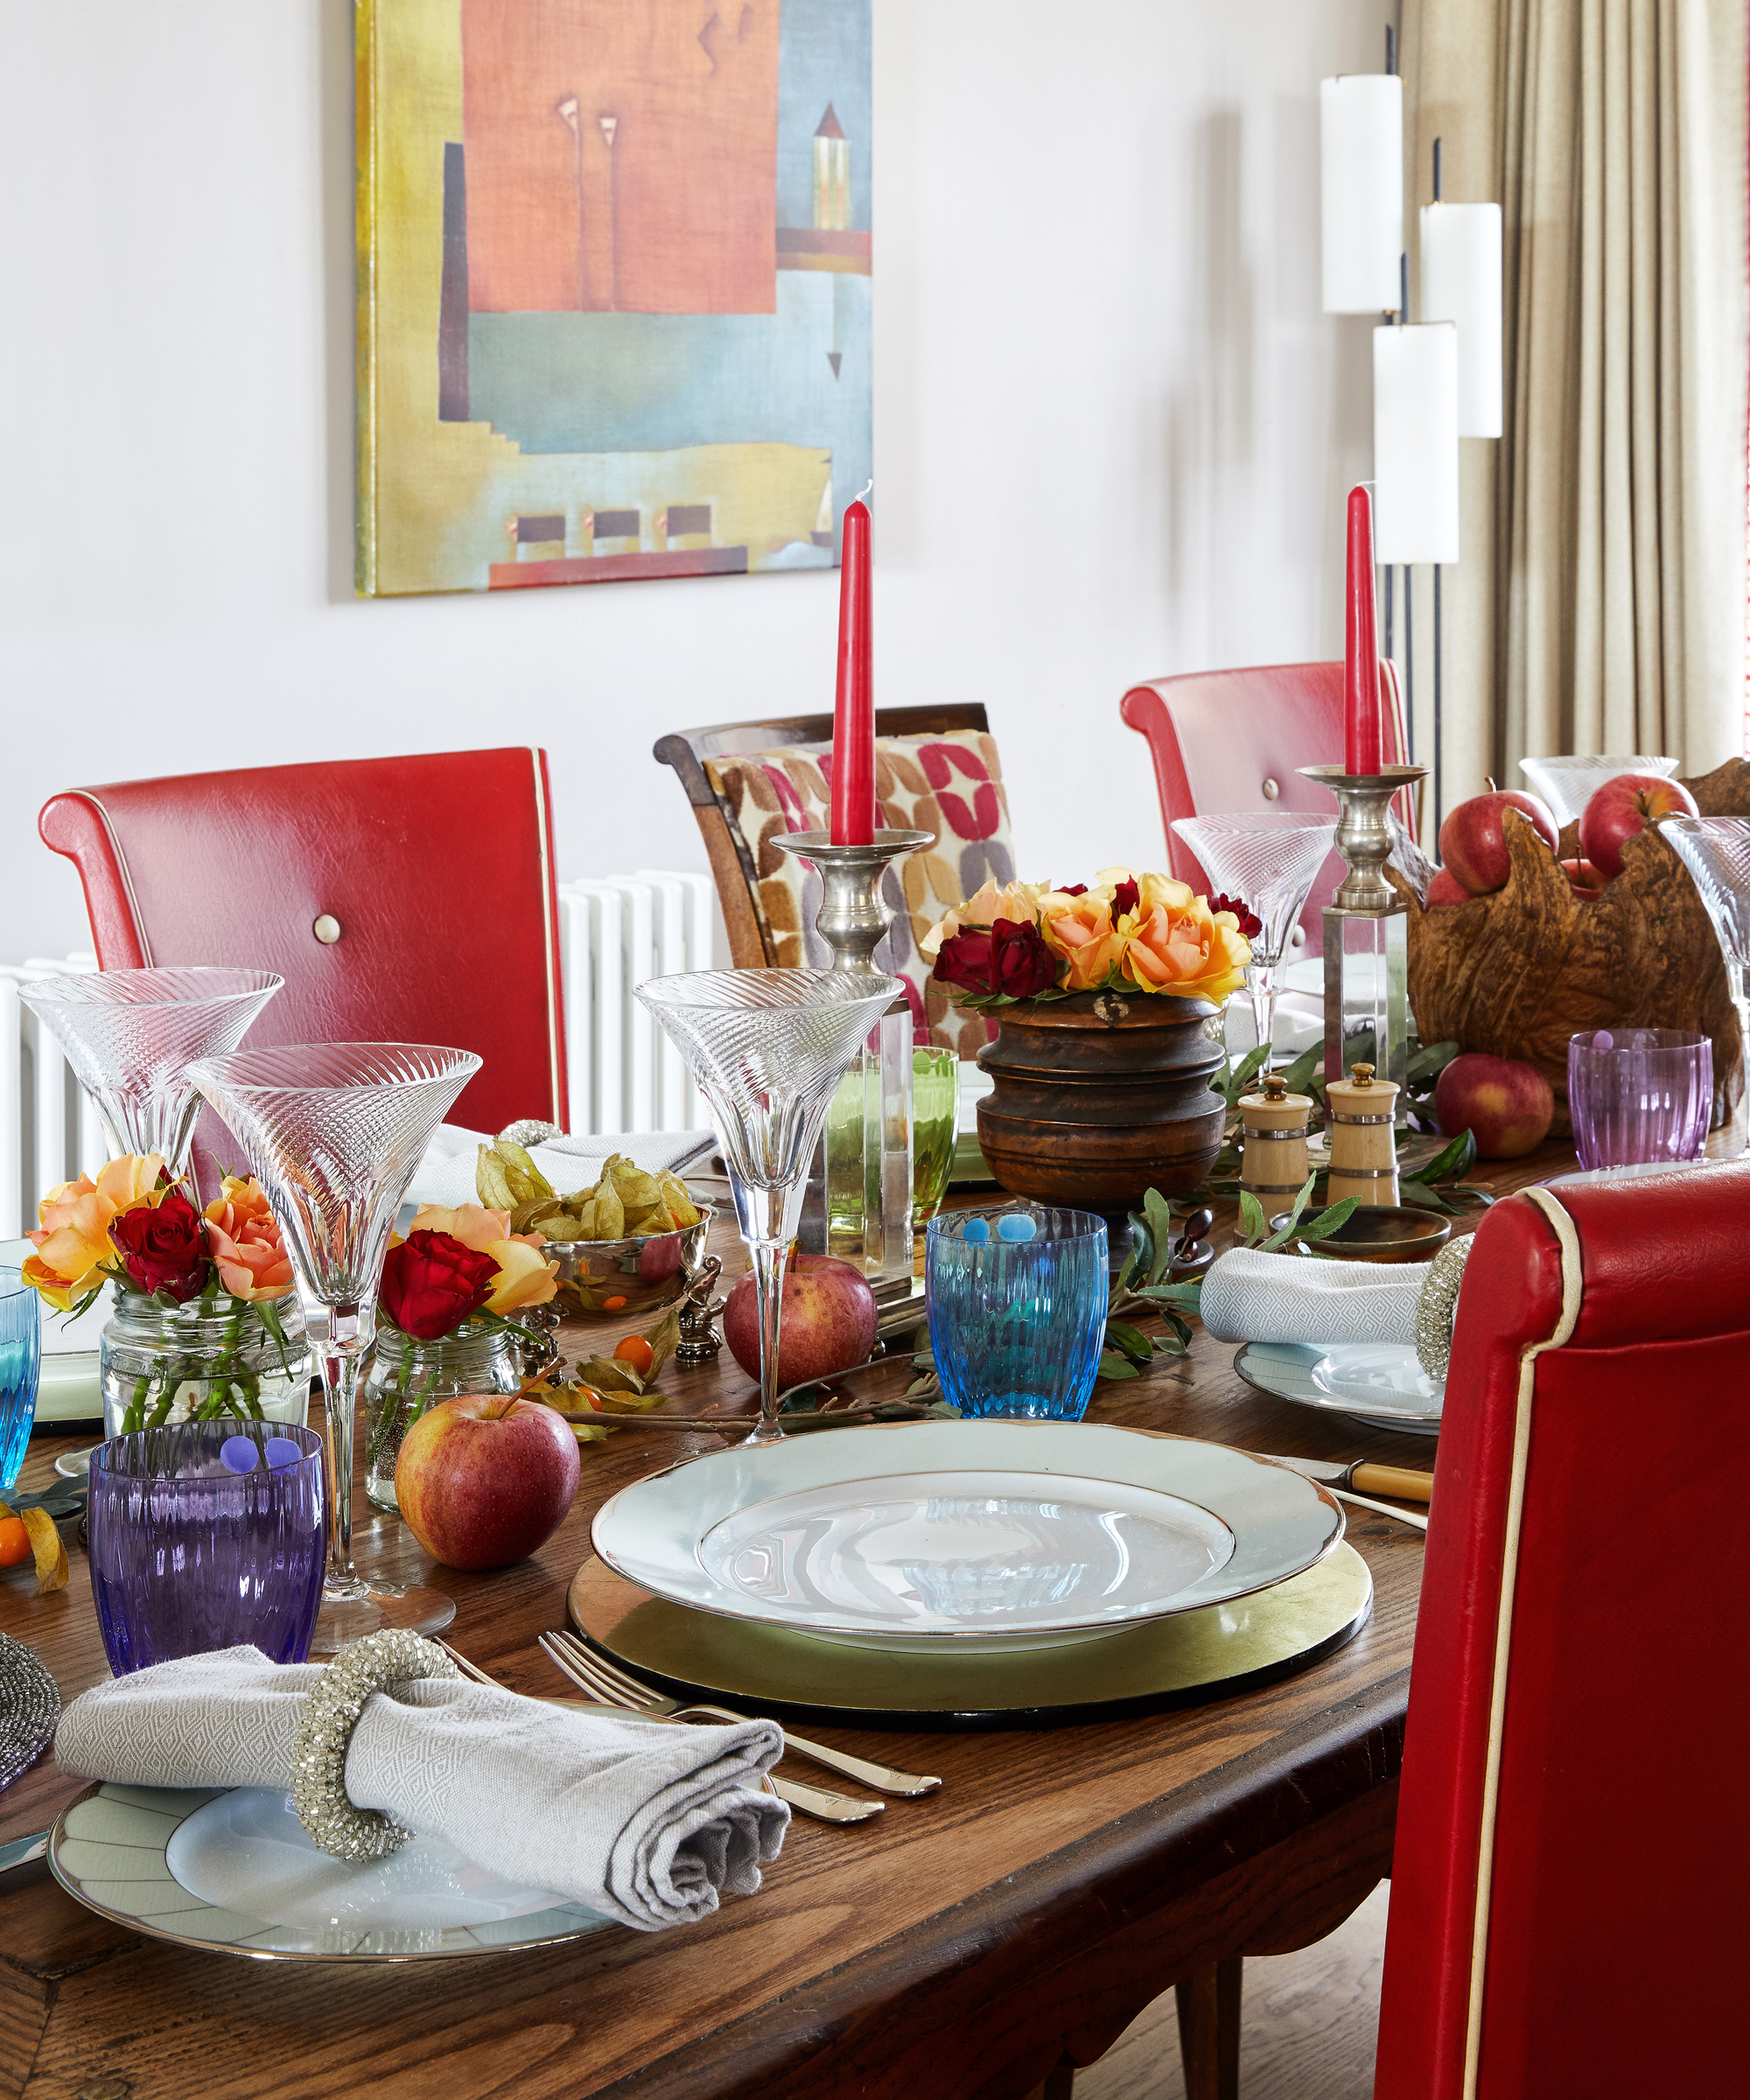 A dining table decor idea with red chairs, blue and purple glasses and fruit decor including red apples and orange physalis